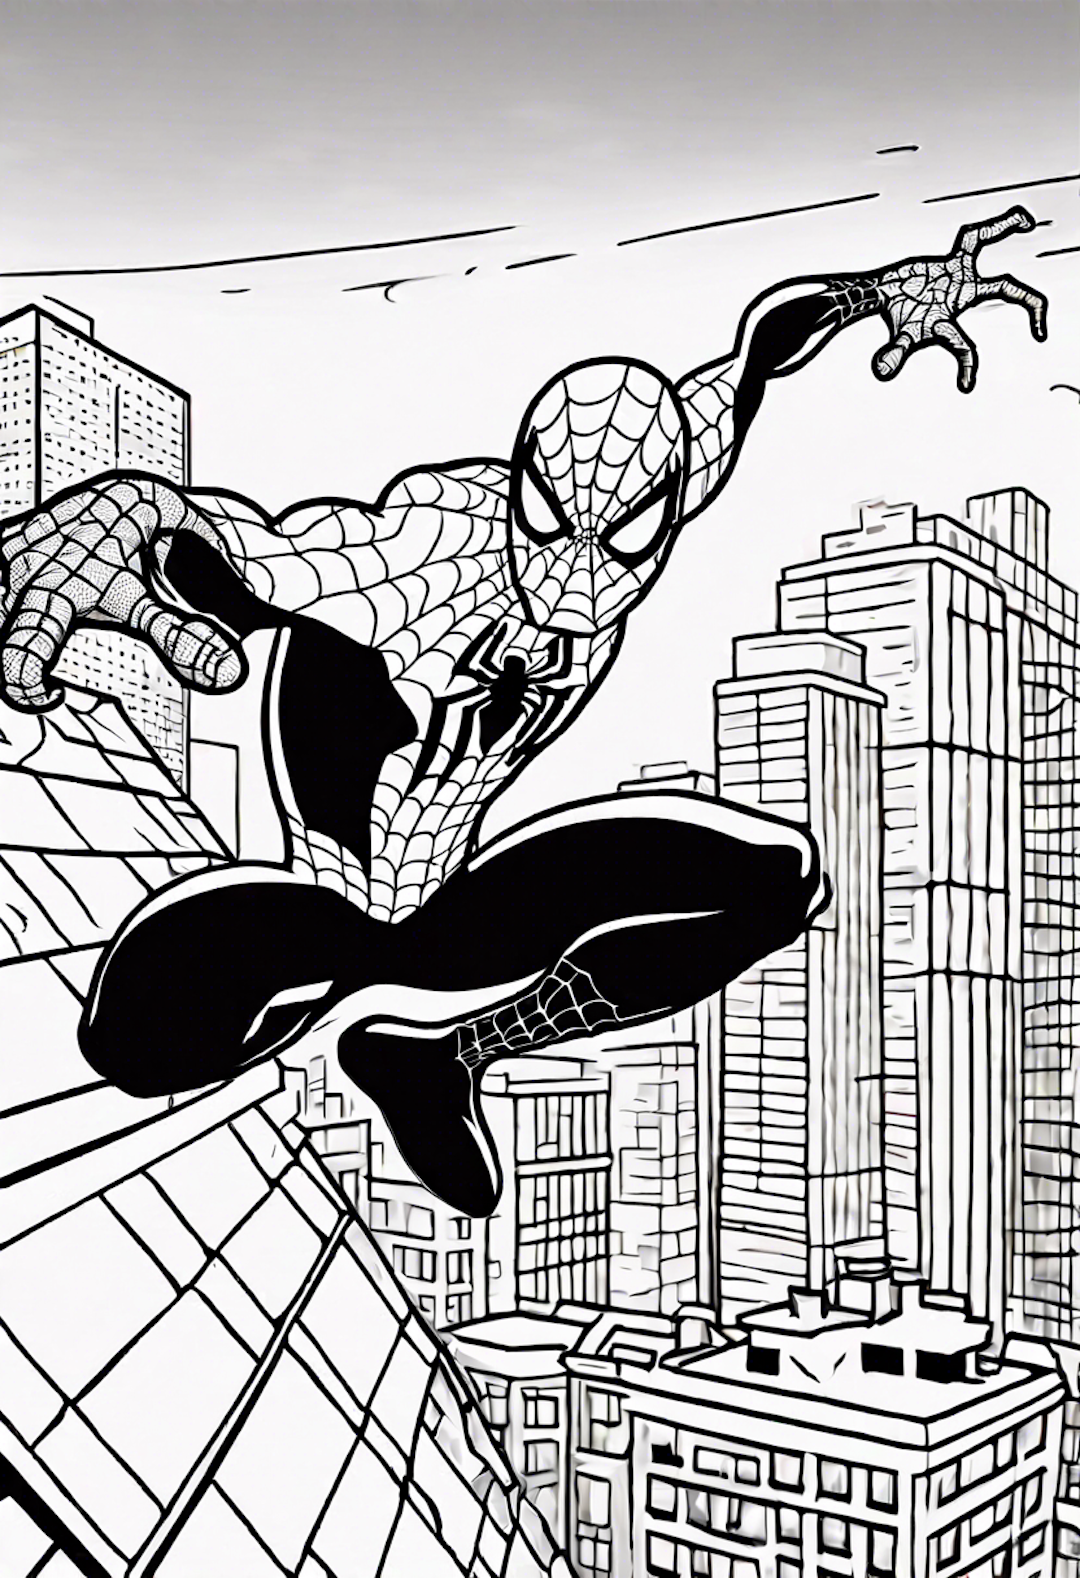 Spiderman In A Chase With Black Cat On The Rooftops